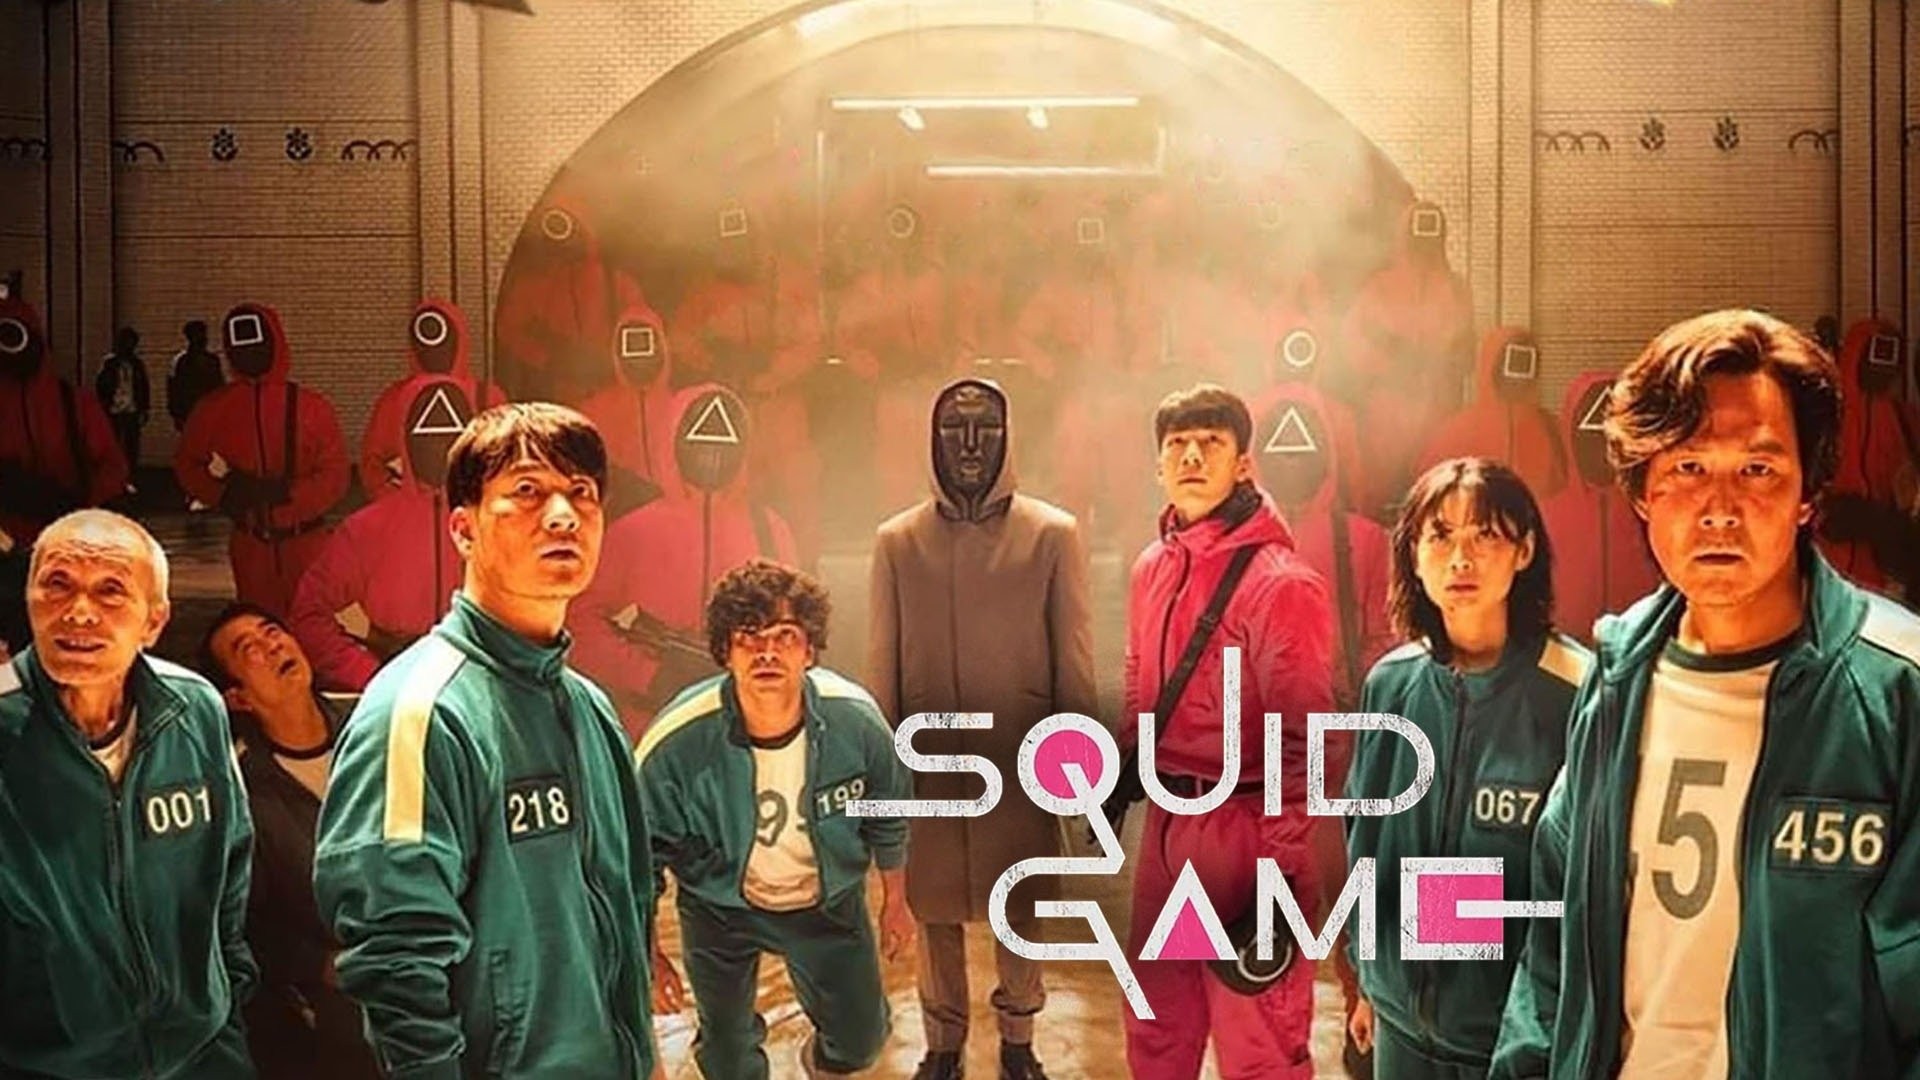 SQUID GAME (Netflix series, Season 1) – #SciFiMonth – Space and